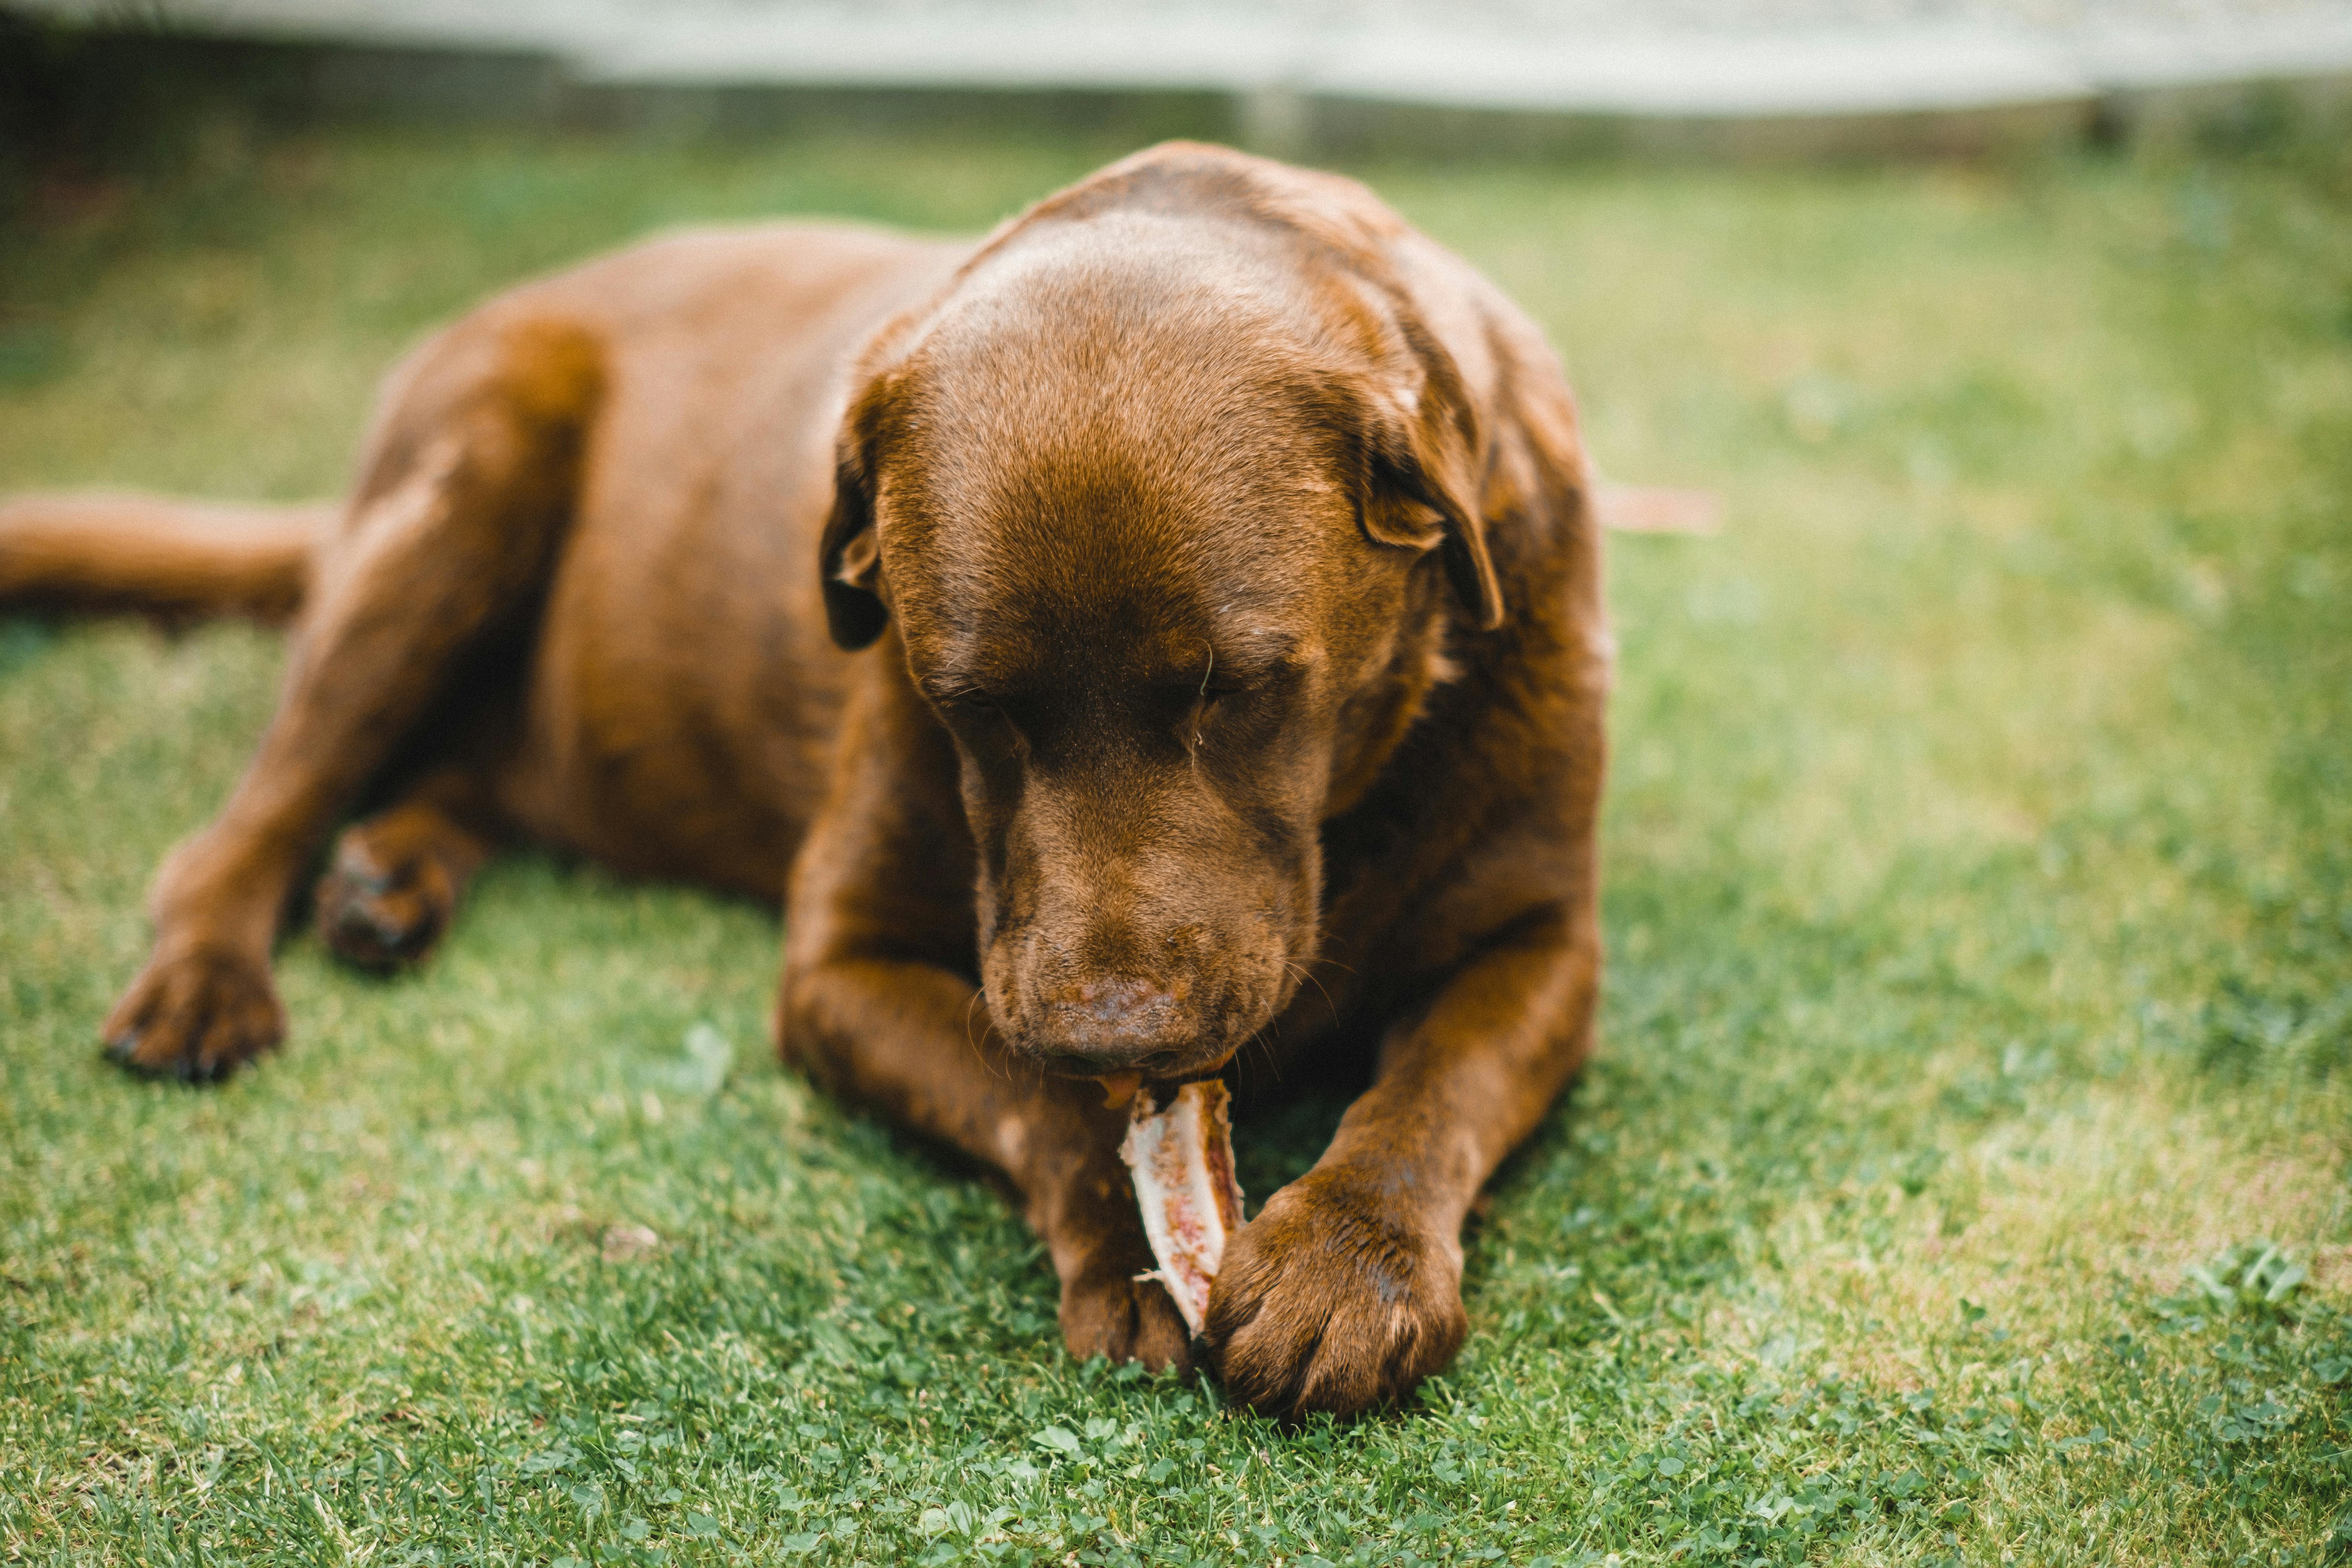 Can dogs eat raw bones?